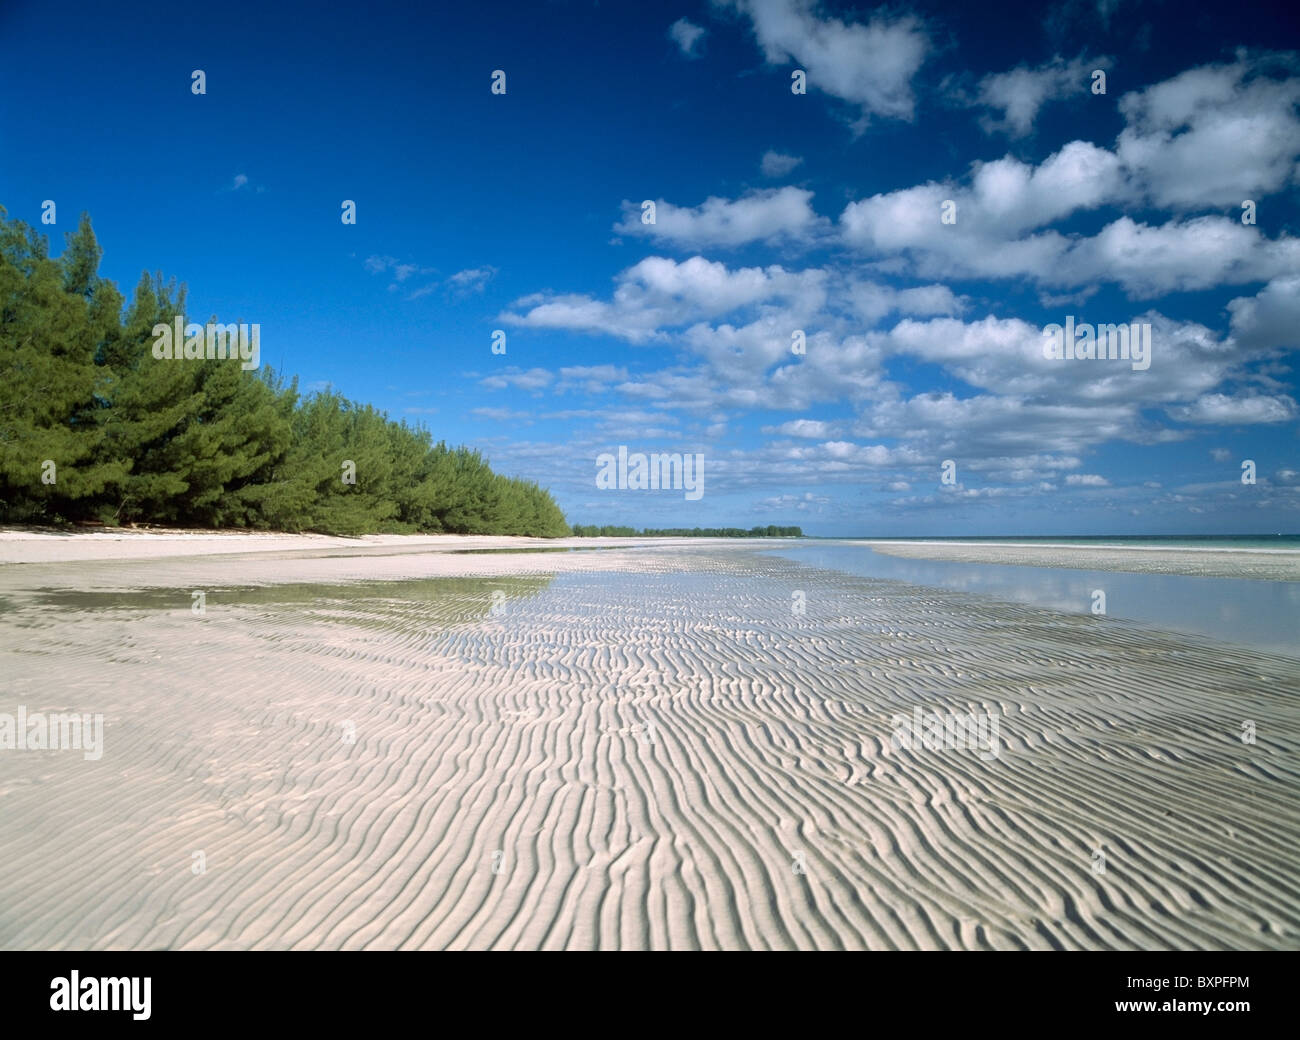 Textured Sand At Low Tide, Low Angle View Stock Photo